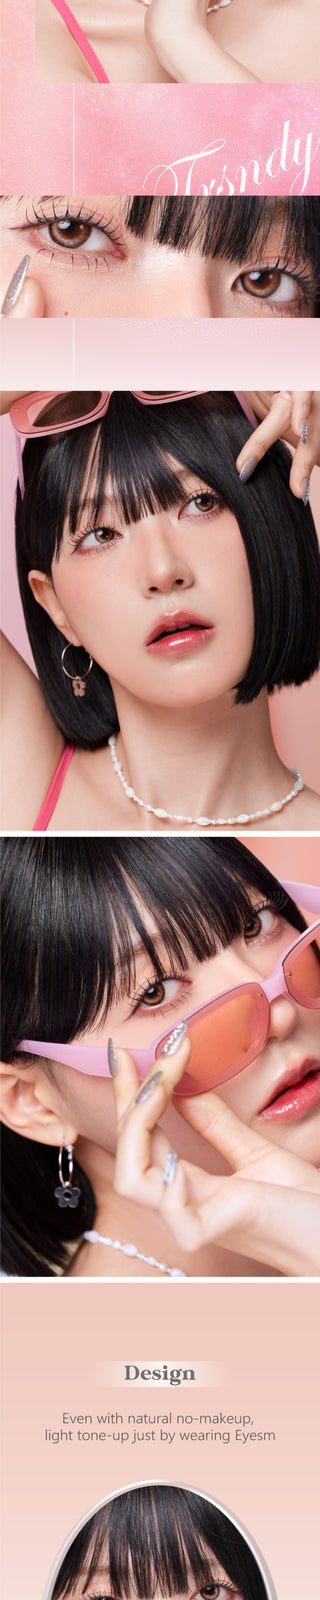 Several views of a Korean model with the Dollring Zoe Brown color contact lenses. An enlargement of a model's eyes with the prescription colored contacts, demonstrating the subtle yet striking change on dark eyes.